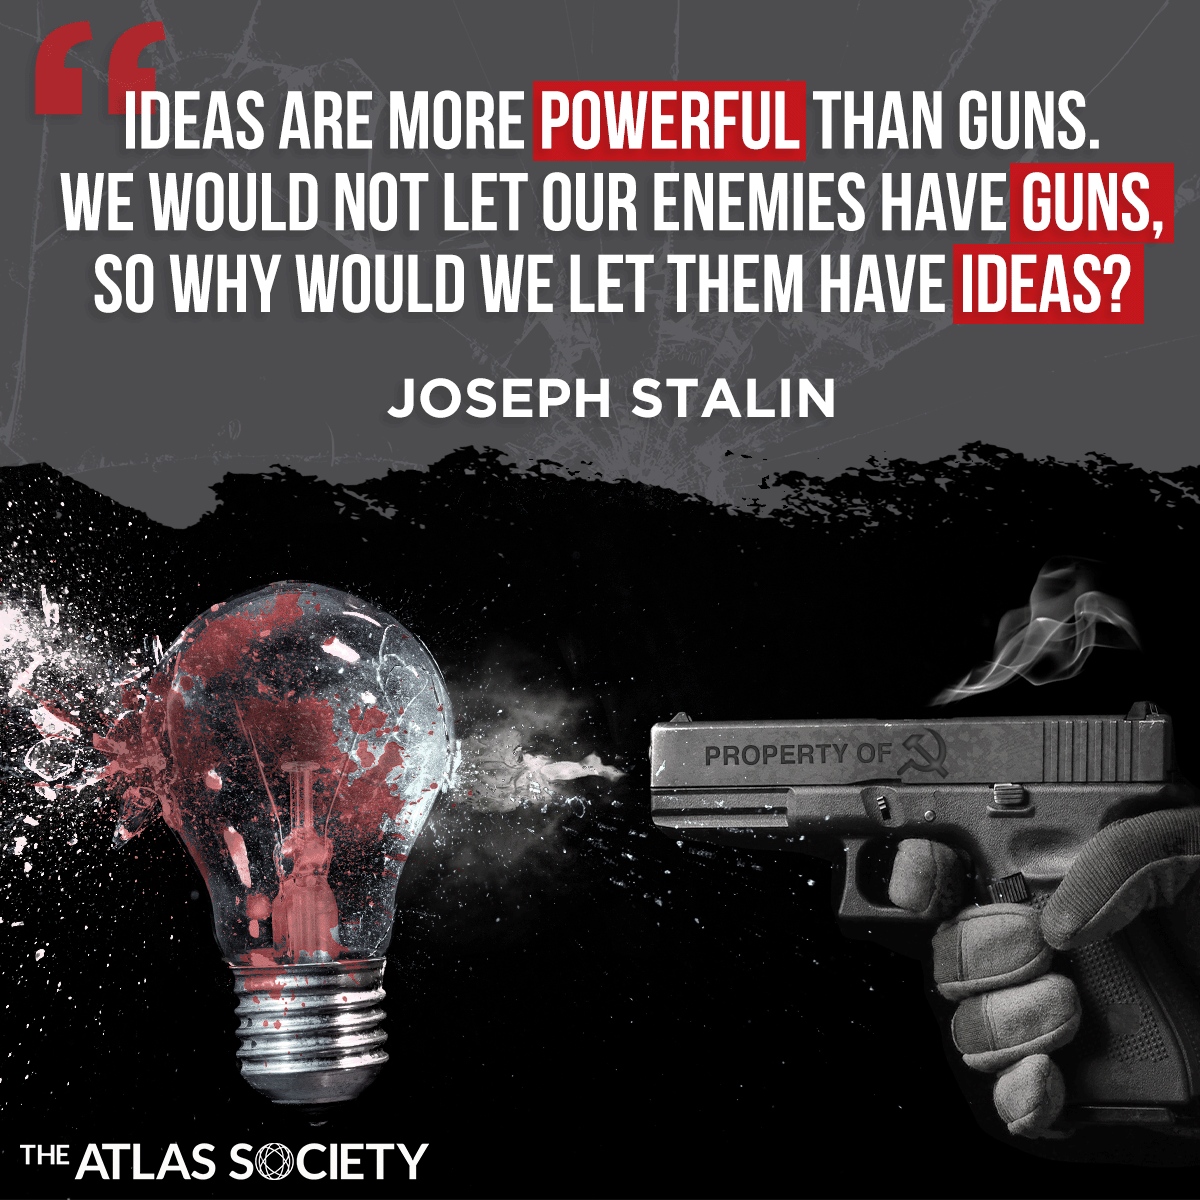 Critical Thinking Is The Most Valuable Weapon. #CriticalThinking #SocialismSucks #Reason #JosephStalin #AynRand